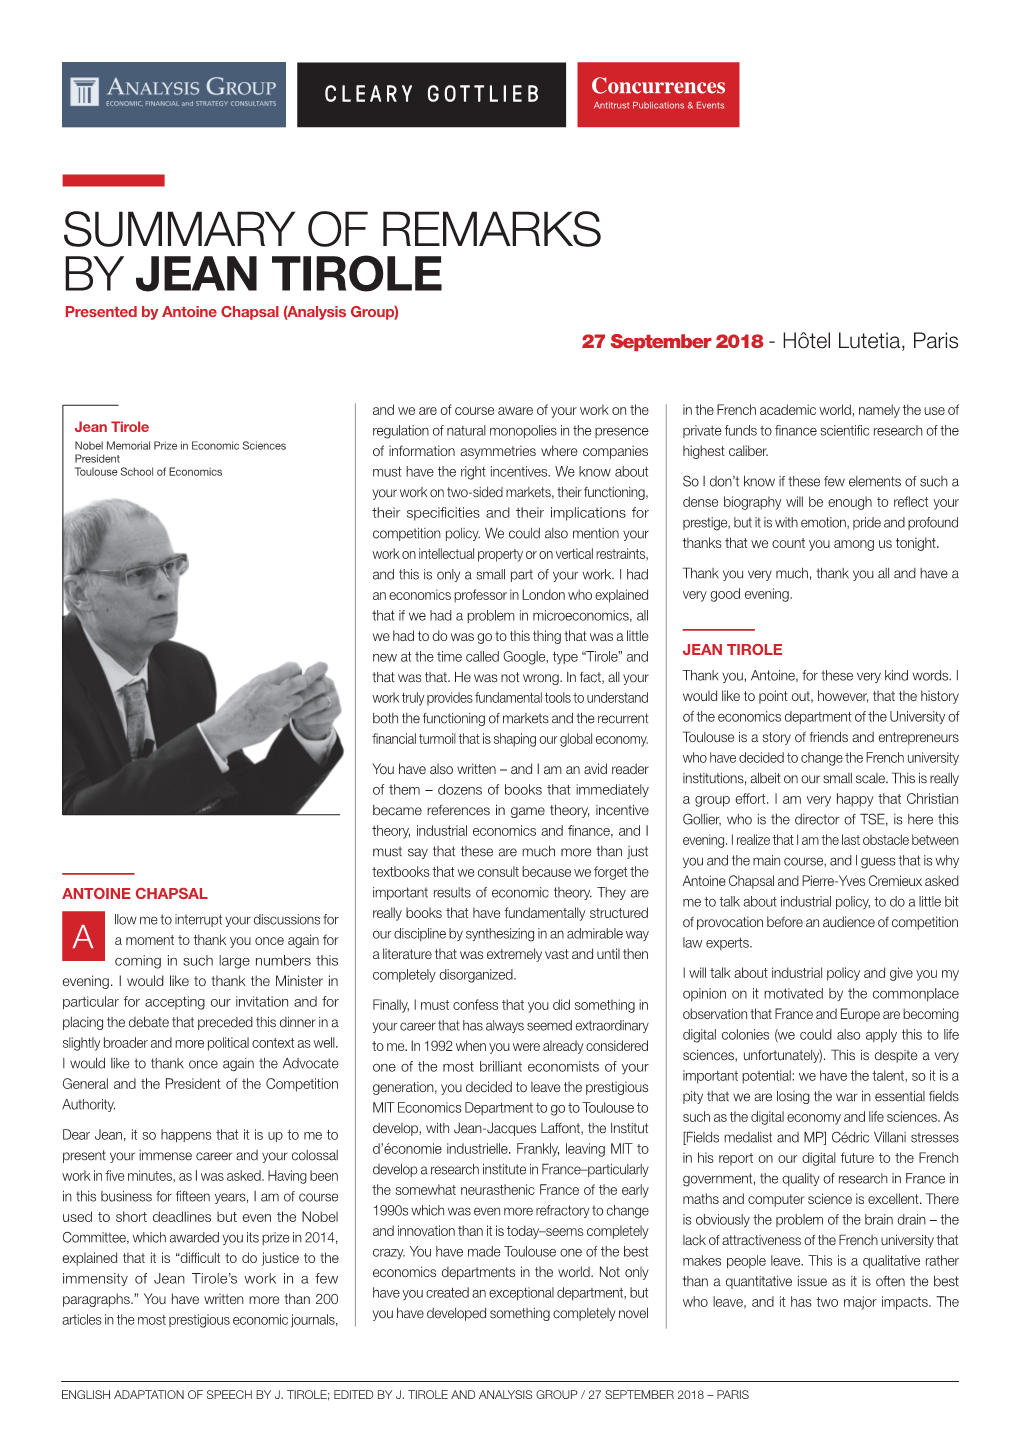 SUMMARY of REMARKS by JEAN TIROLE Presented by Antoine Chapsal (Analysis Group) 27 September 2018 - Hôtel Lutetia, Paris